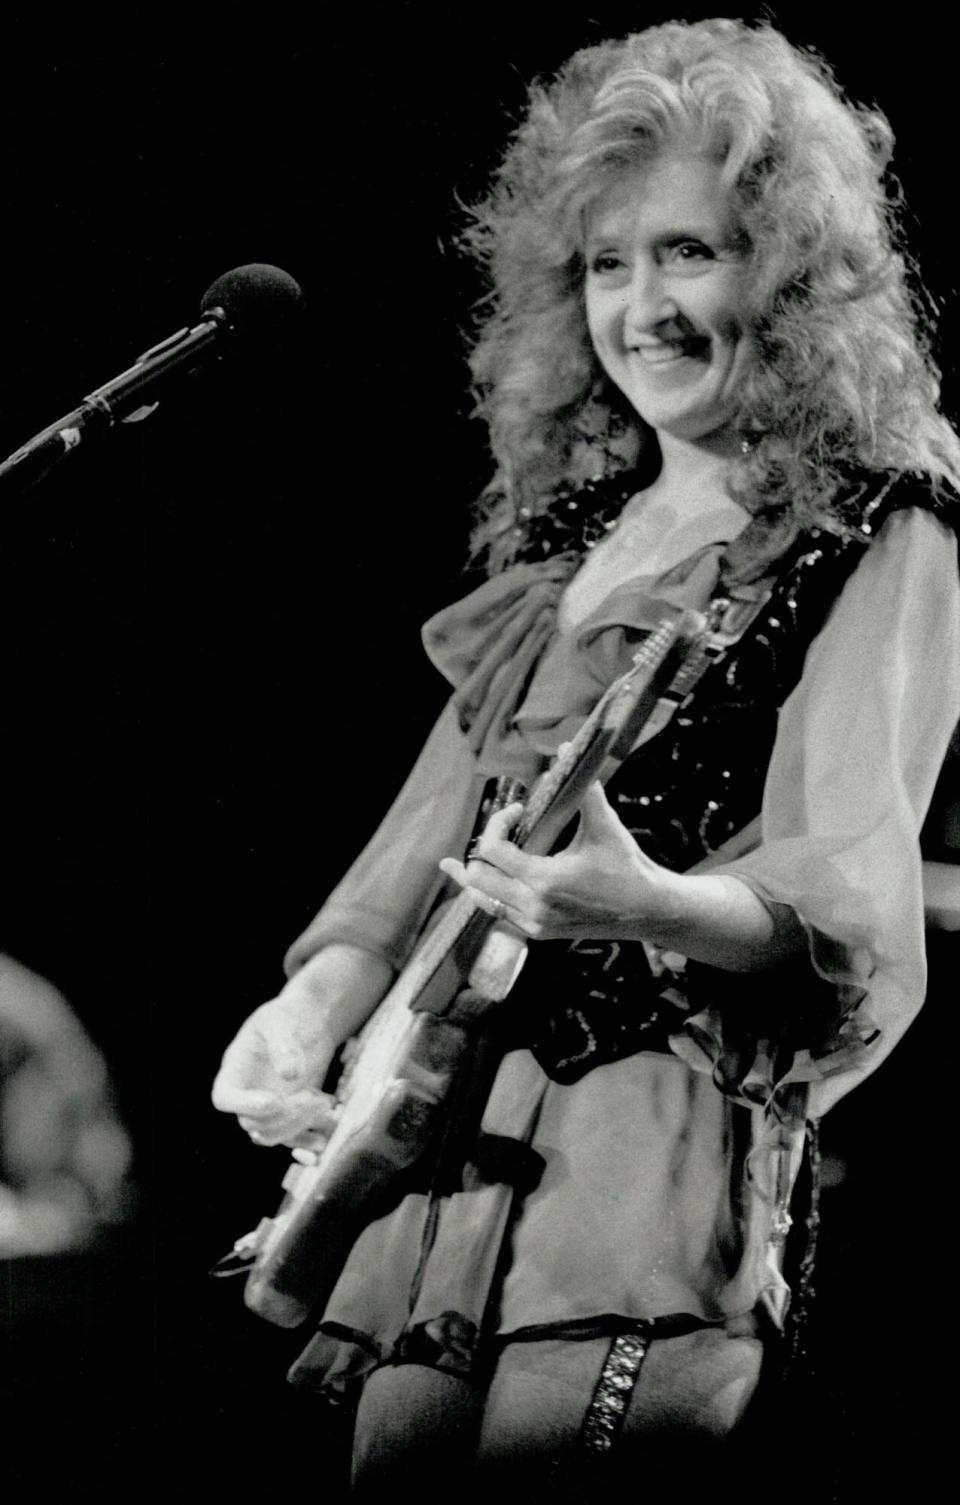 CANADA - AUGUST 14: Bonnie Raitt: The Grandstand headliner singled out singer or songwriter Shirley Eikhard as 'one of the most talented women I've ever heard.' (Photo by Mike Slaughter/Toronto Star via Getty Images)